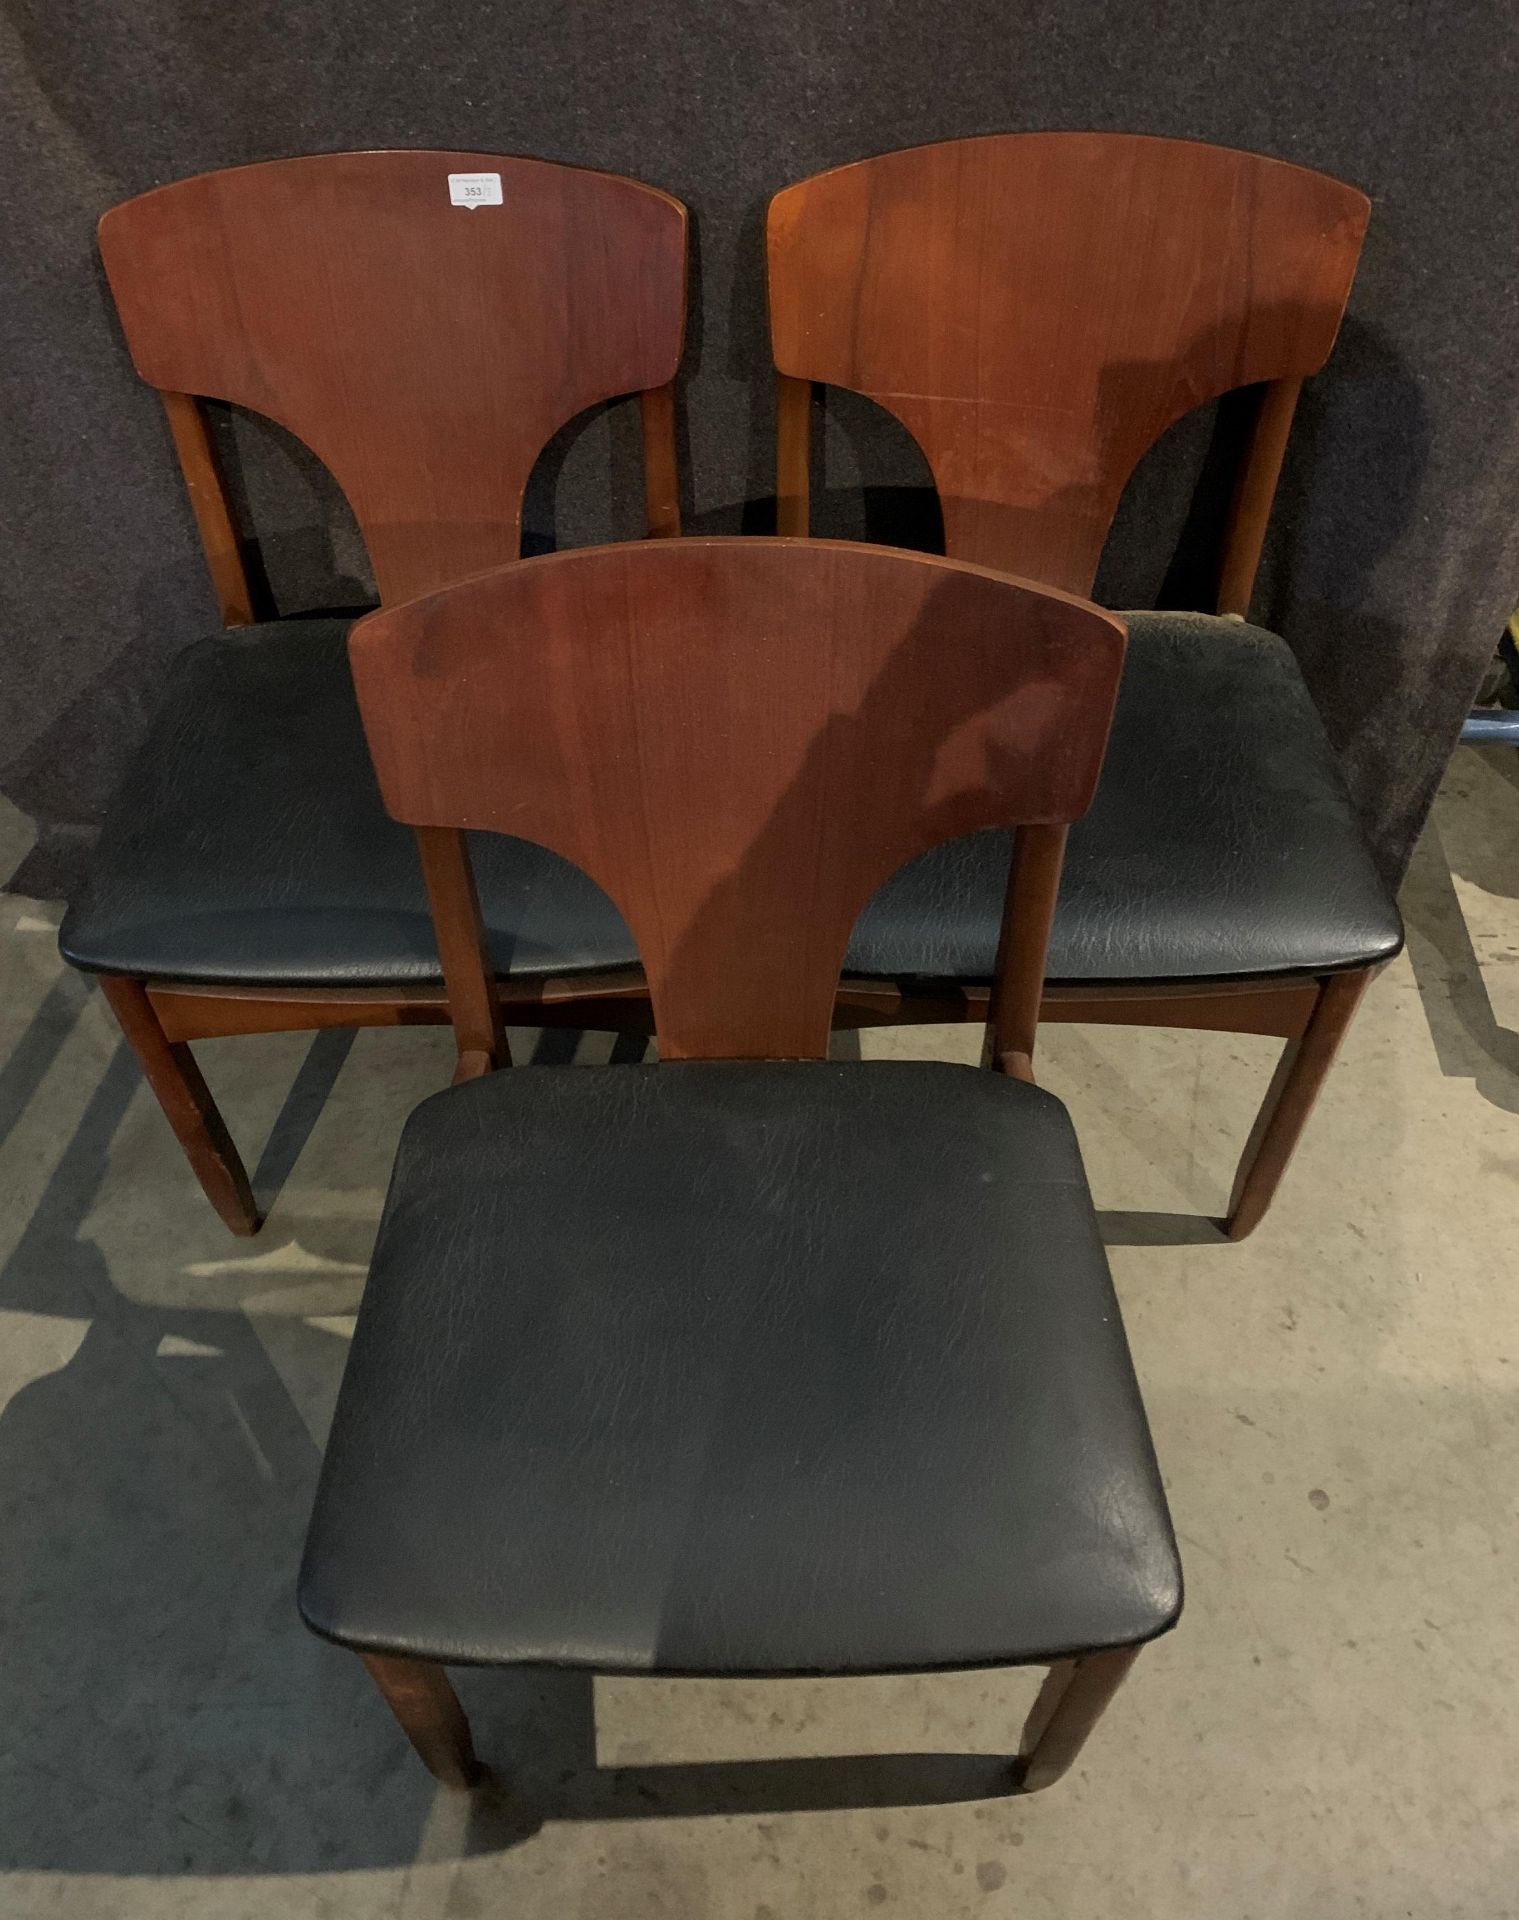 Three teak 1960s dining chairs with black PVC seats - [Please note - the upholstery in this lot